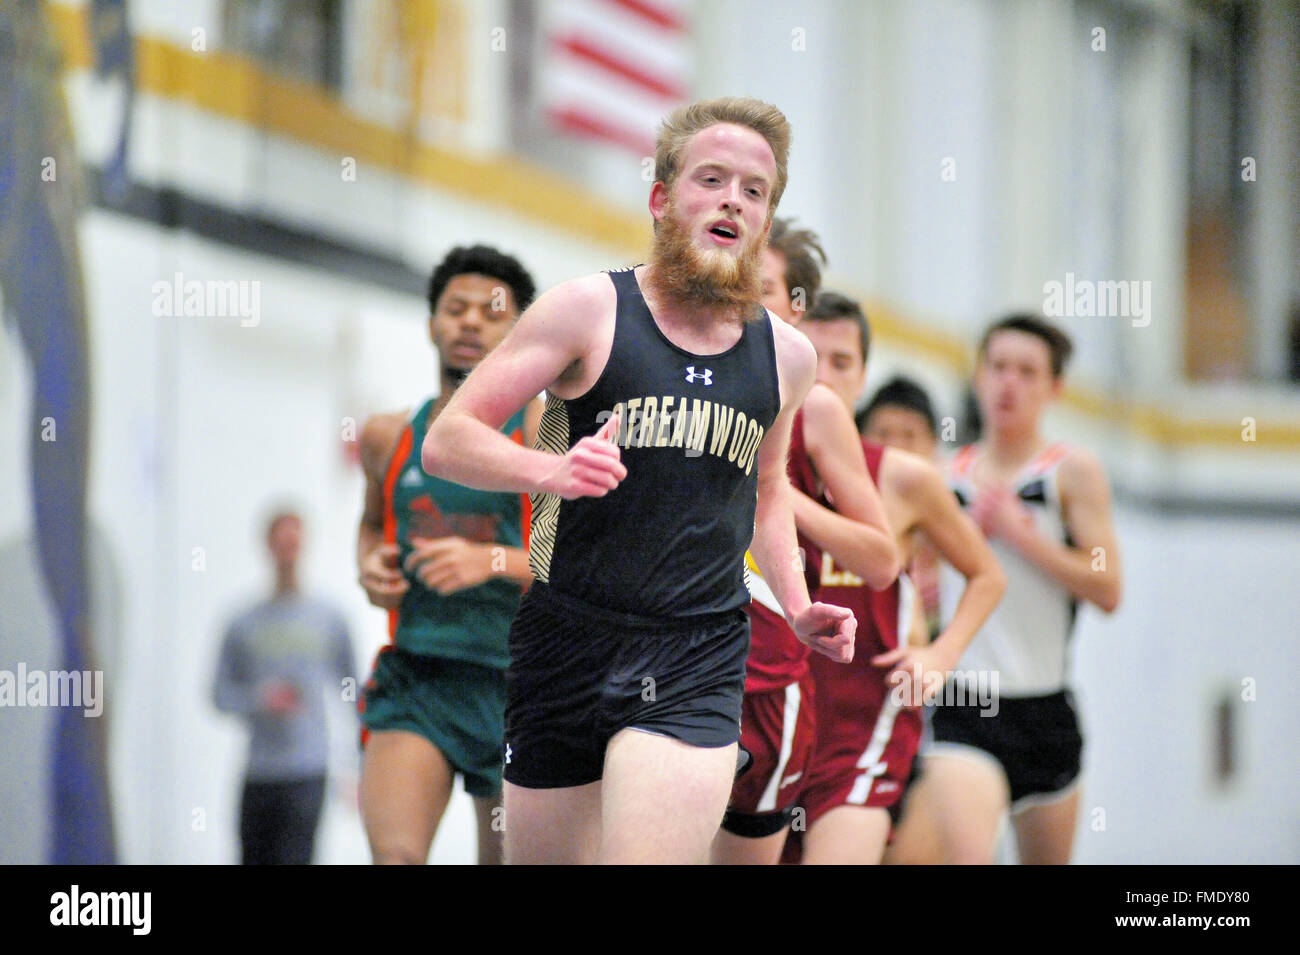 Runner leading the pack during the 3200-meter run at an indoor high school track meet. USA. Stock Photo